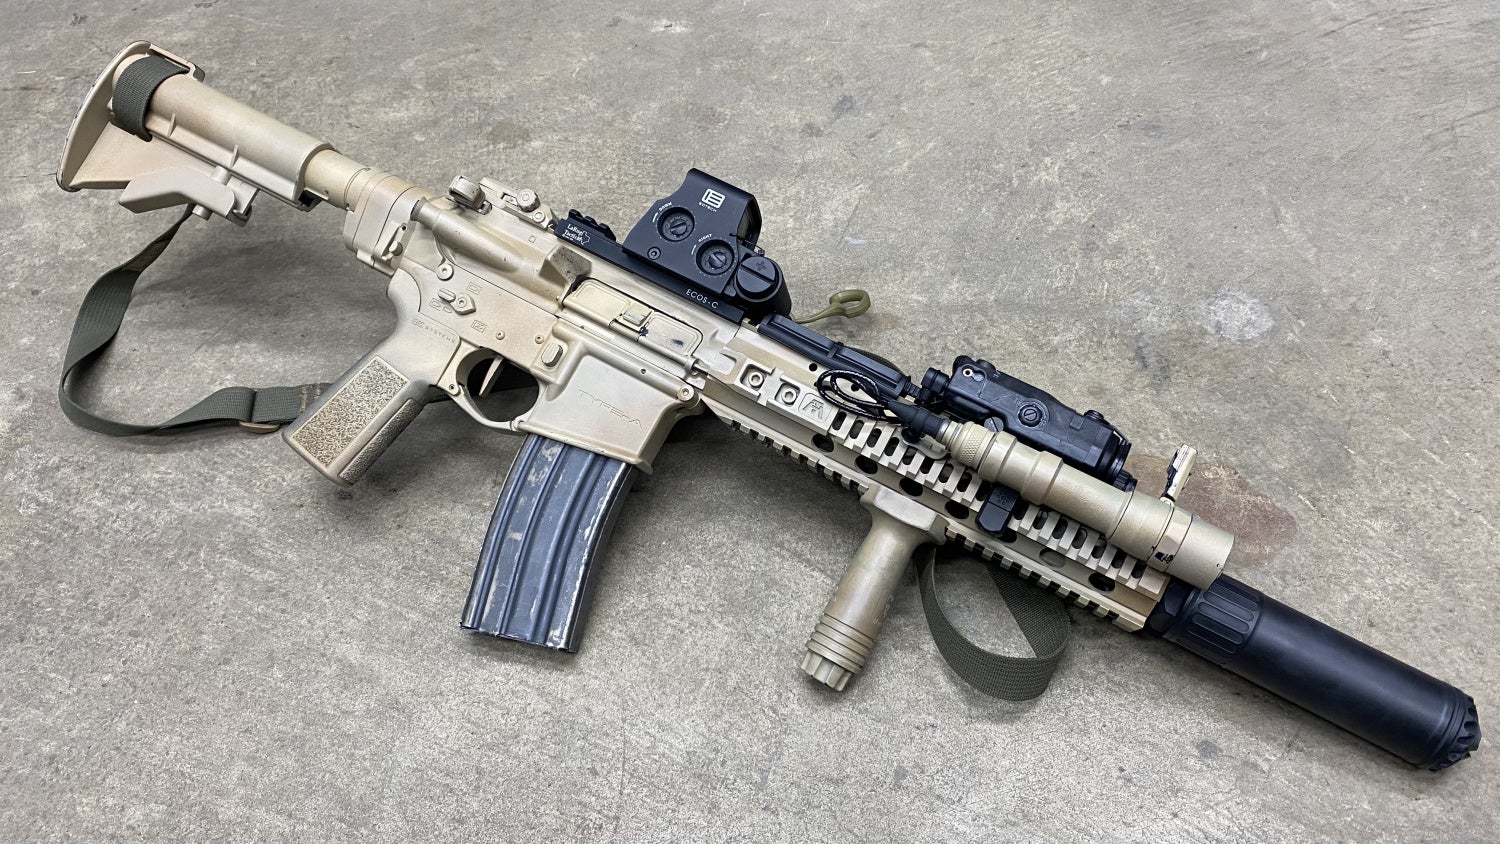 Type-A Unveils the New CQBR Block II Resto-Mod Rifle